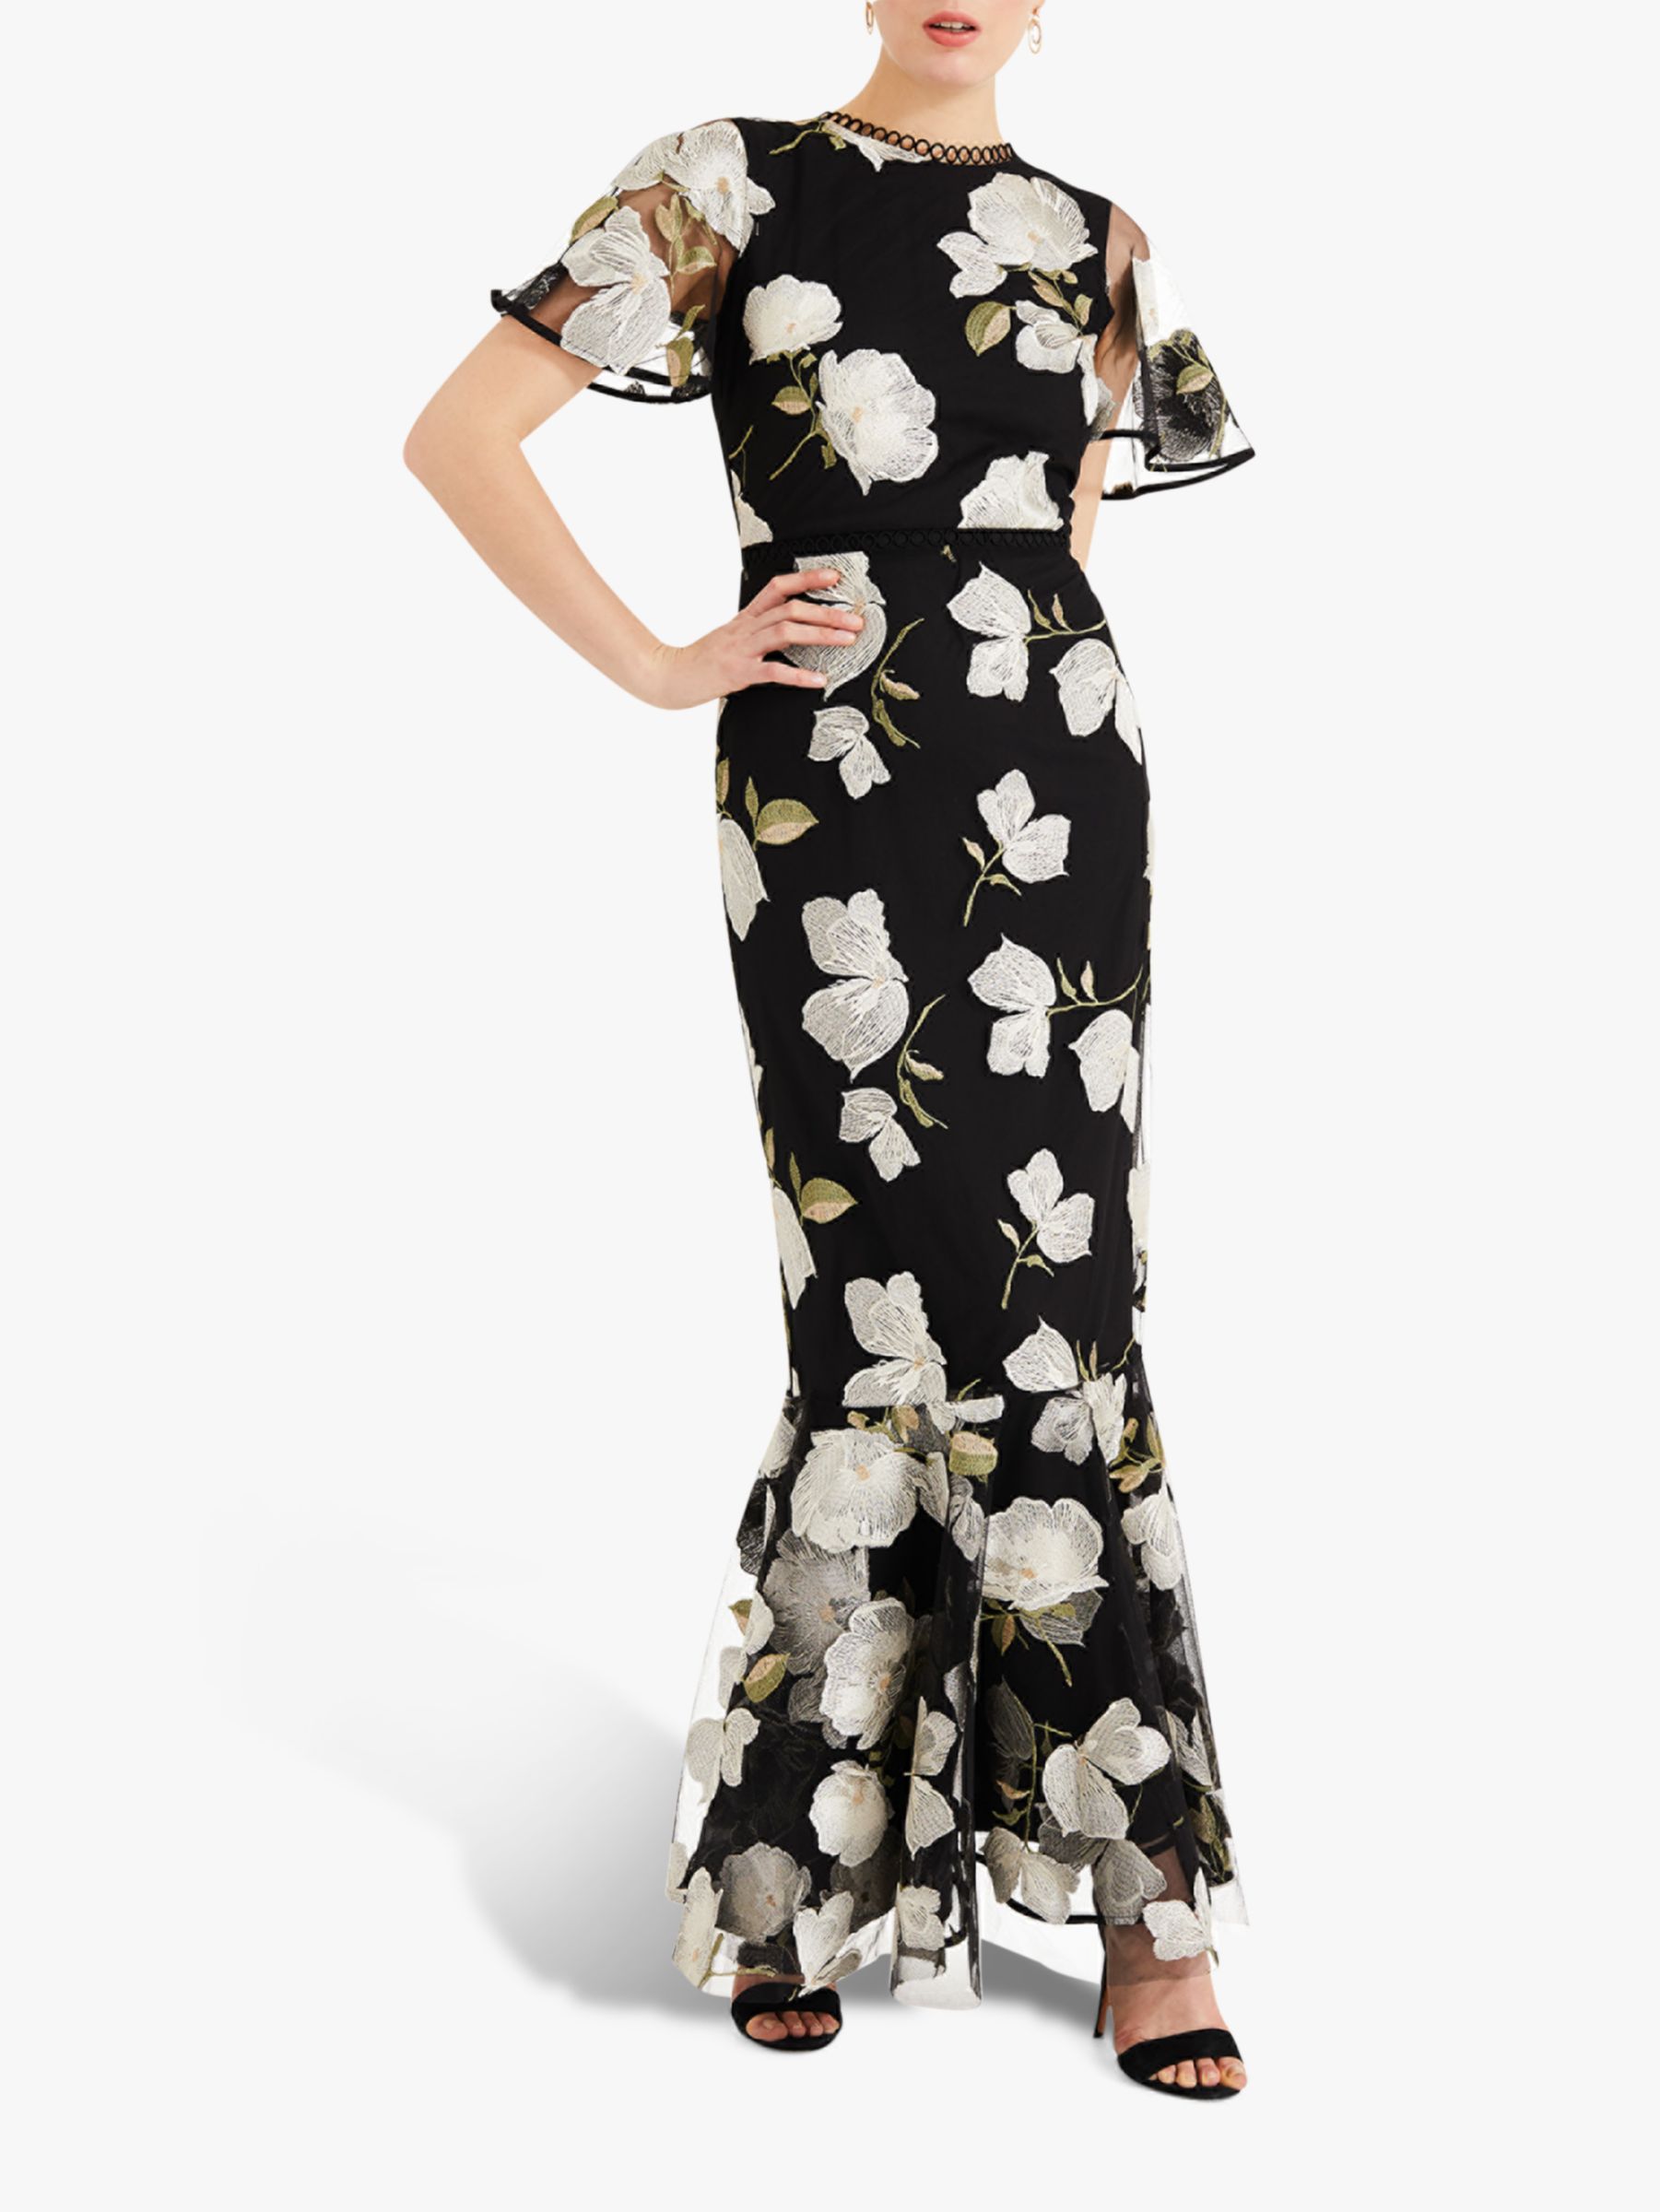 Phase Eight Christine Floral Embroidered Maxi Dress, Black/Cream at